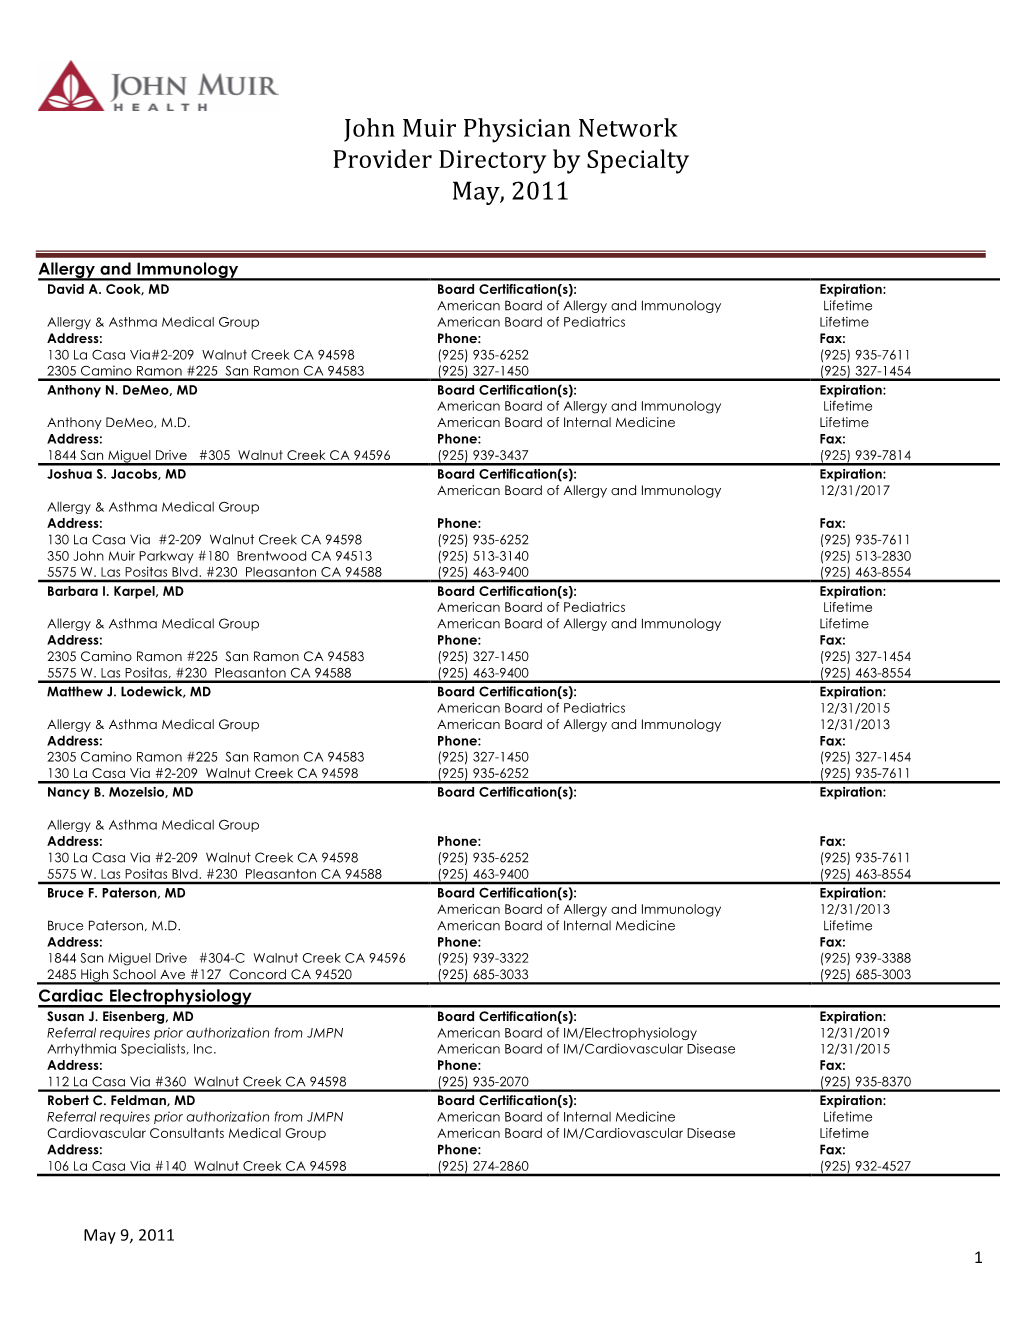 John Muir Physician Network Provider Directory by Specialty May, 2011